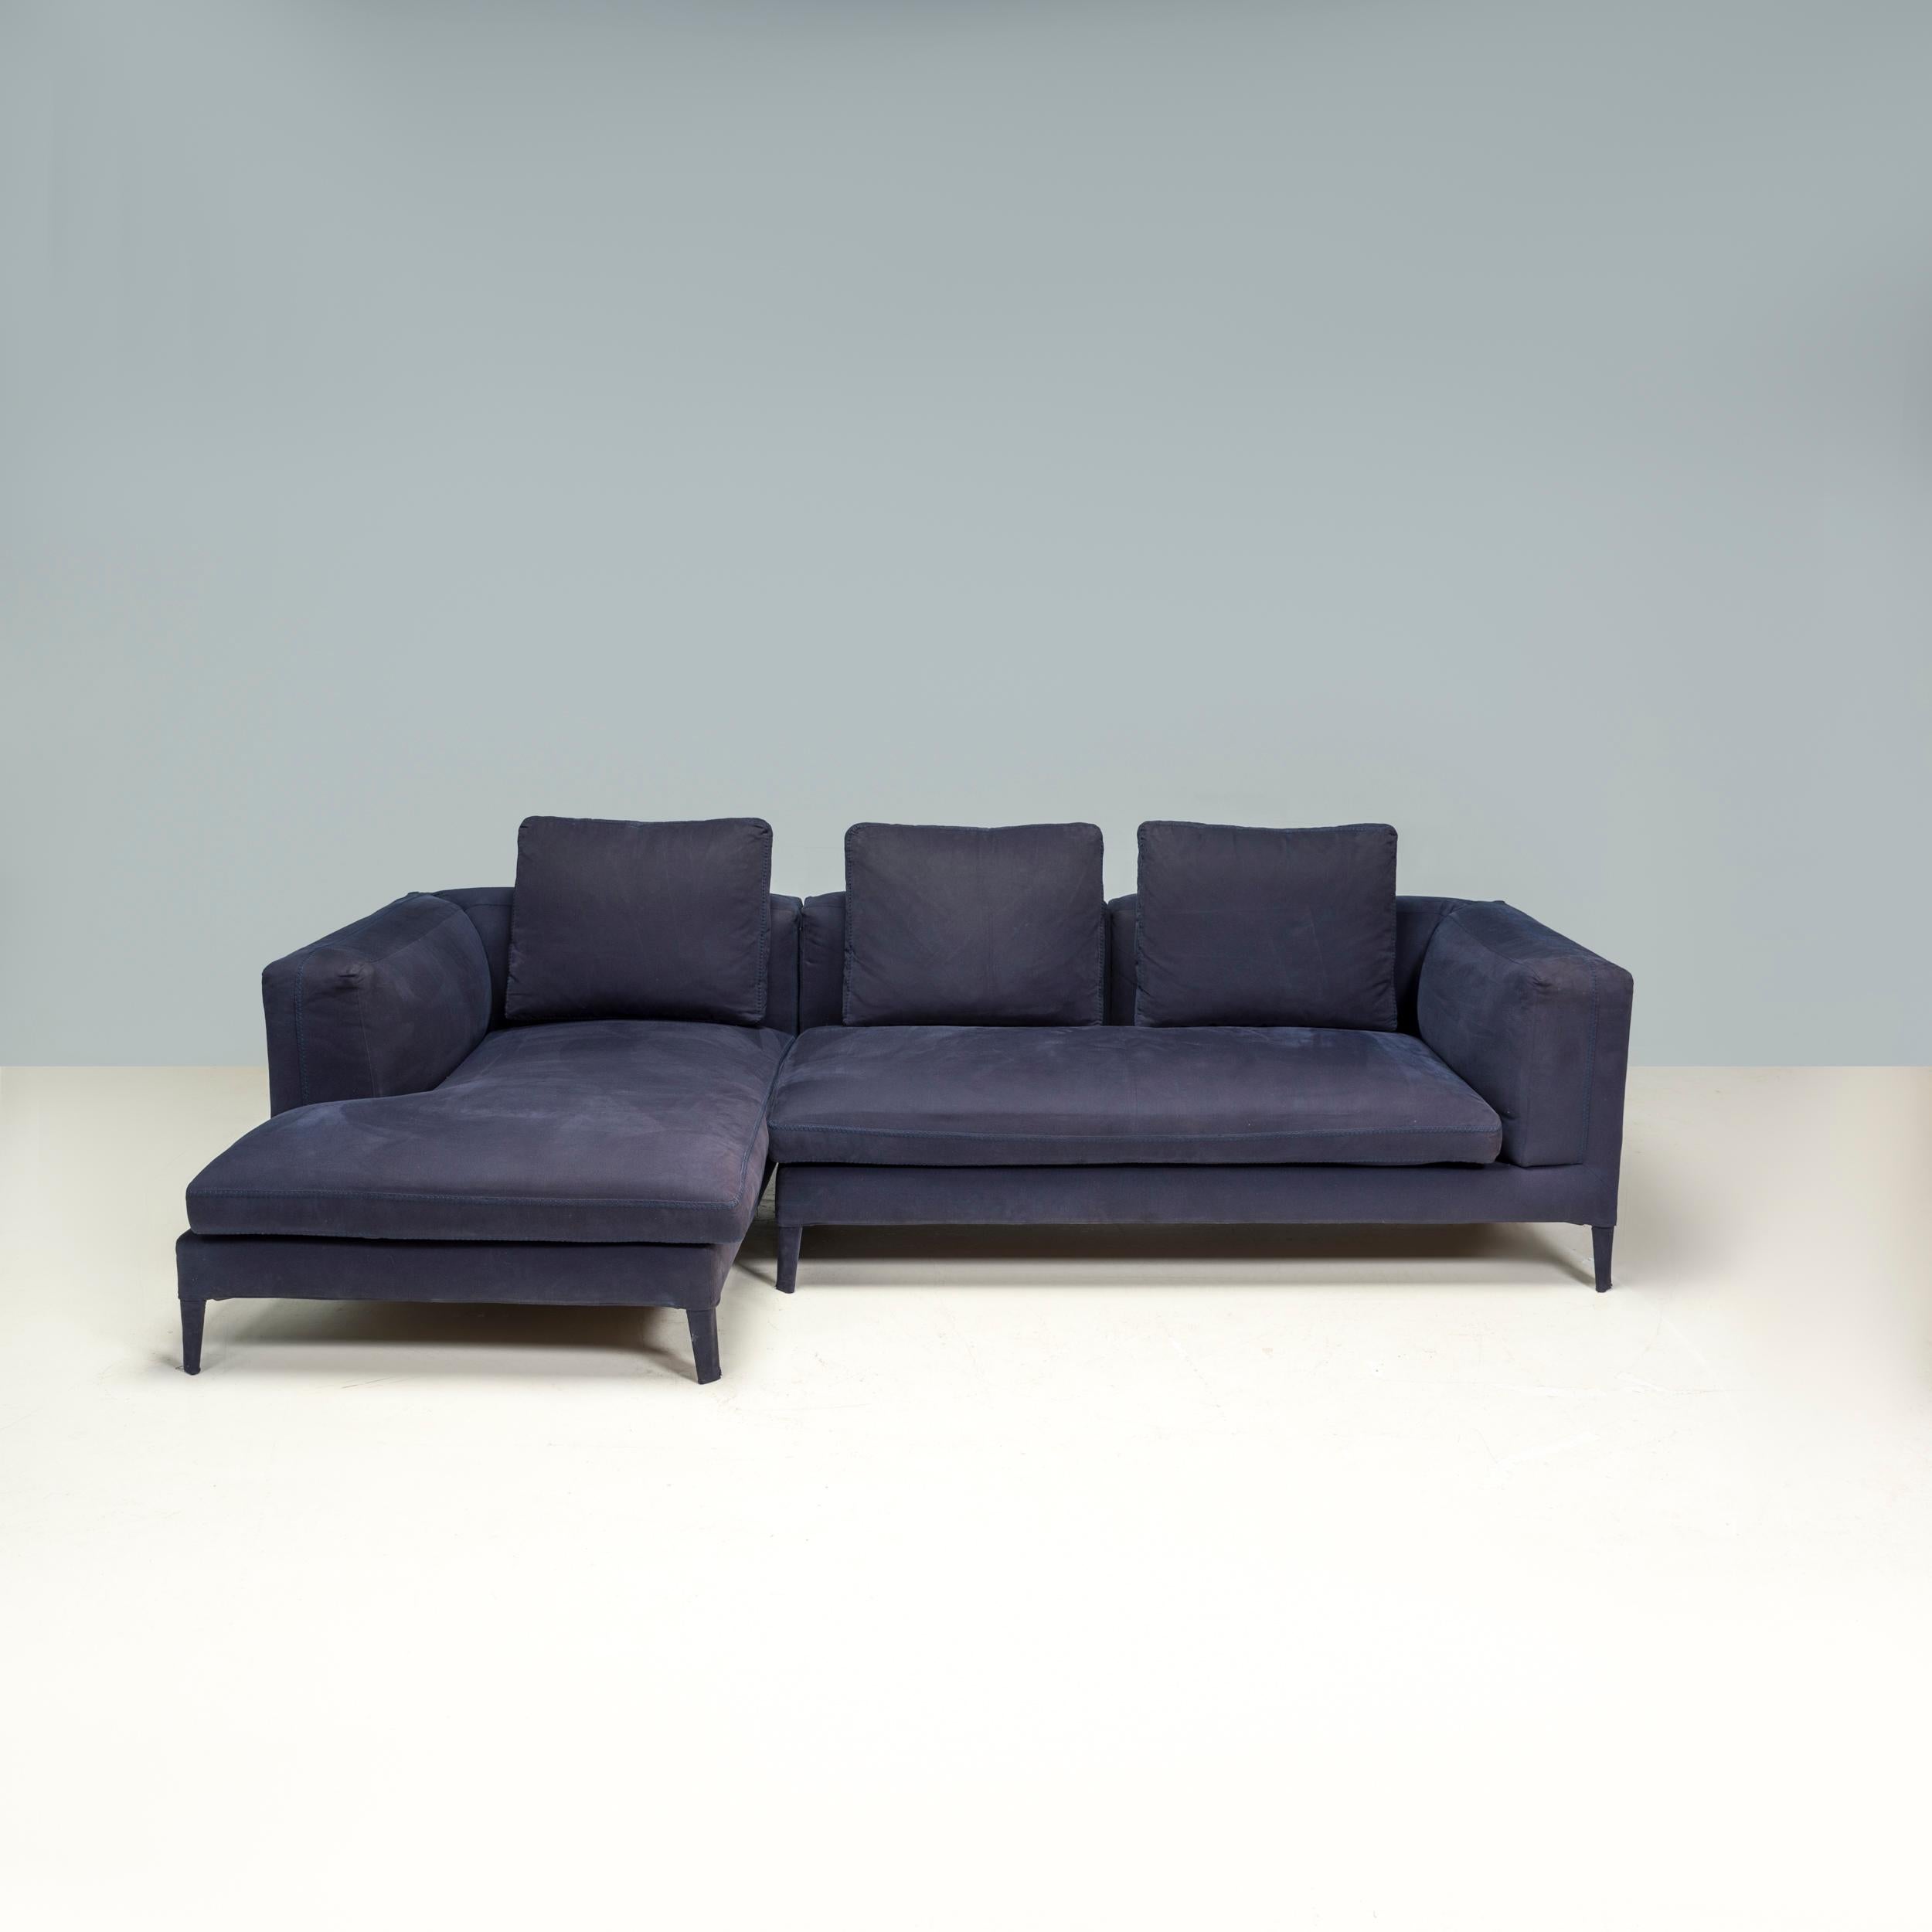 Originally designed by Antonio Citterio in 2012 for B&B Italia, the Michel sofa is a fantastic example of modern furniture design.

Constructed from a tubular steel frame, the sofa is made up to two modules in a classic tuxedo style with integrated